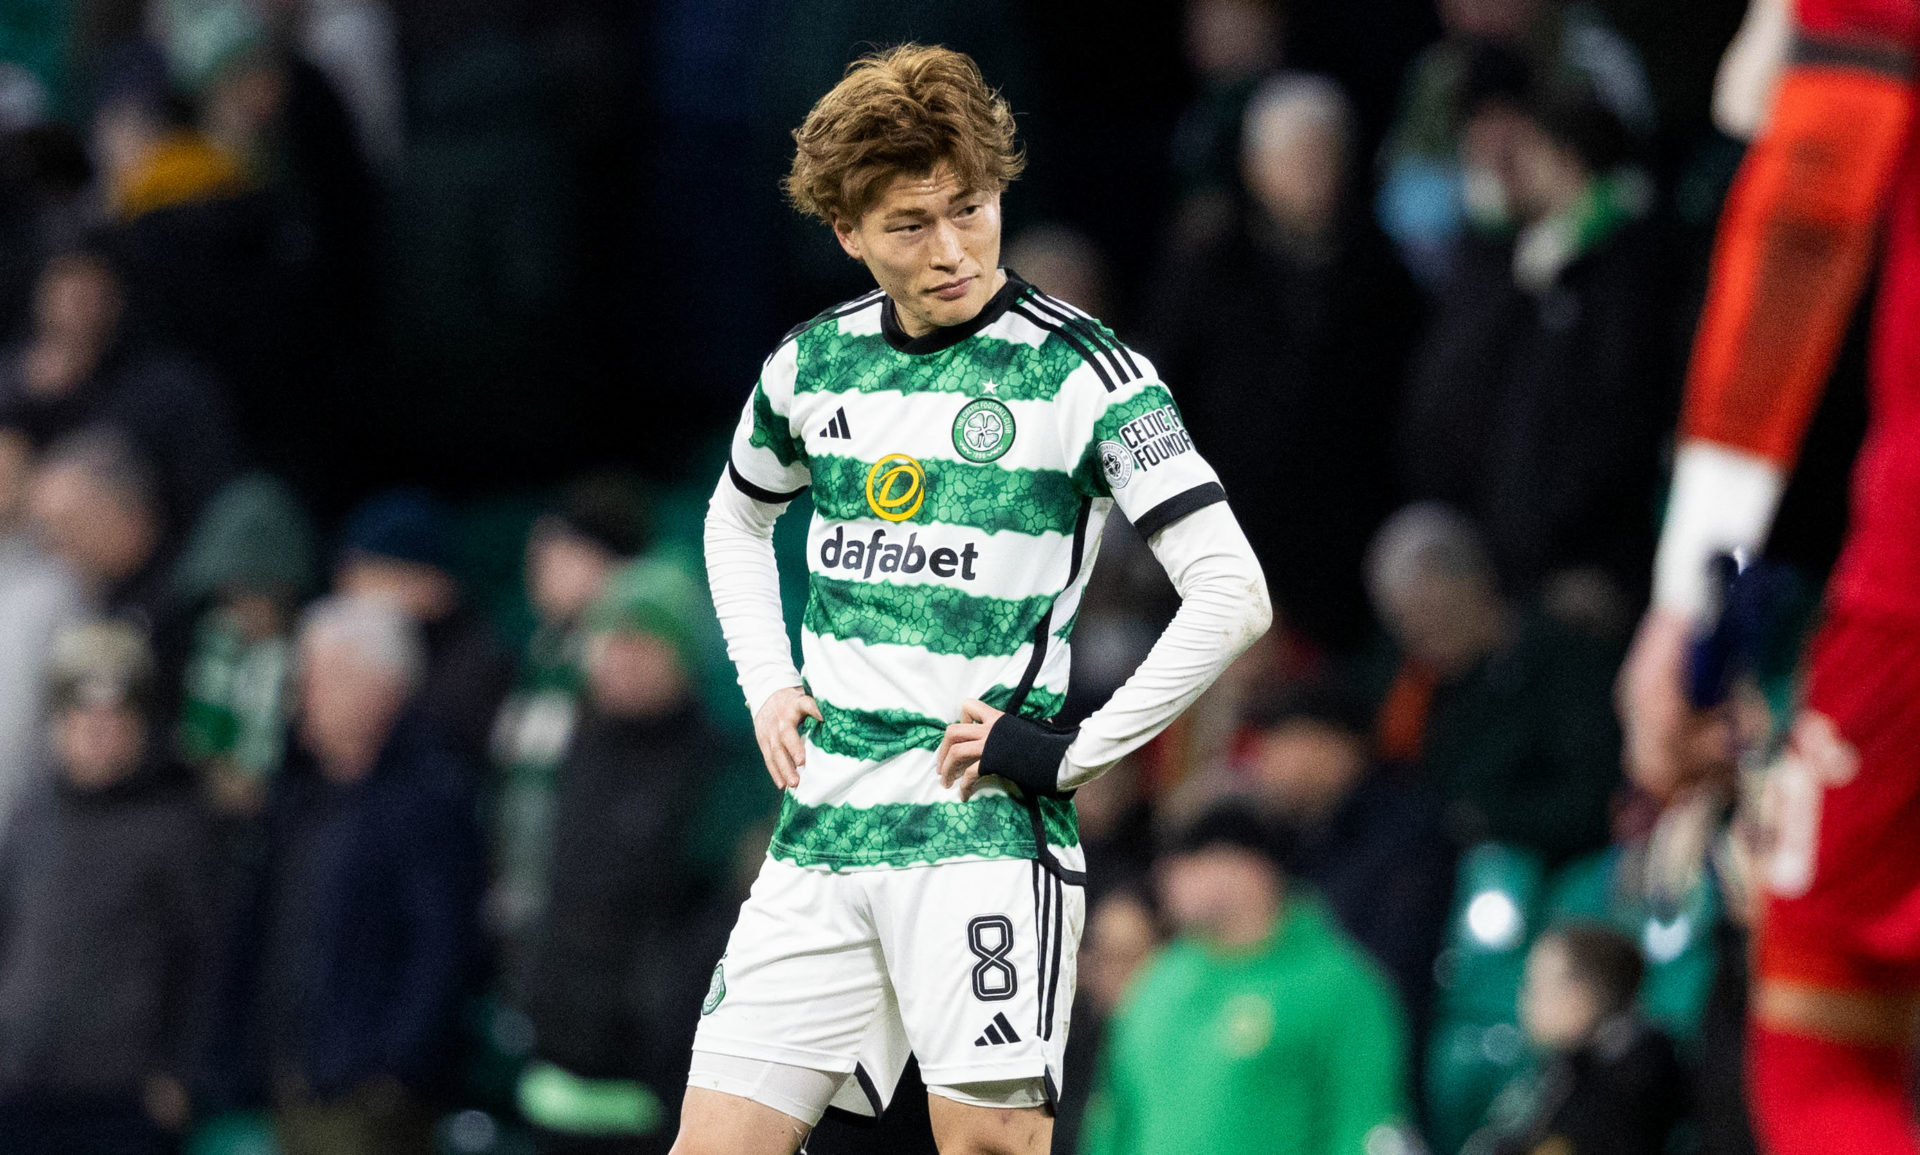 Neil Lennon: Kyogo Furuhashi’s form nothing to do with Brendan Rodgers’ system